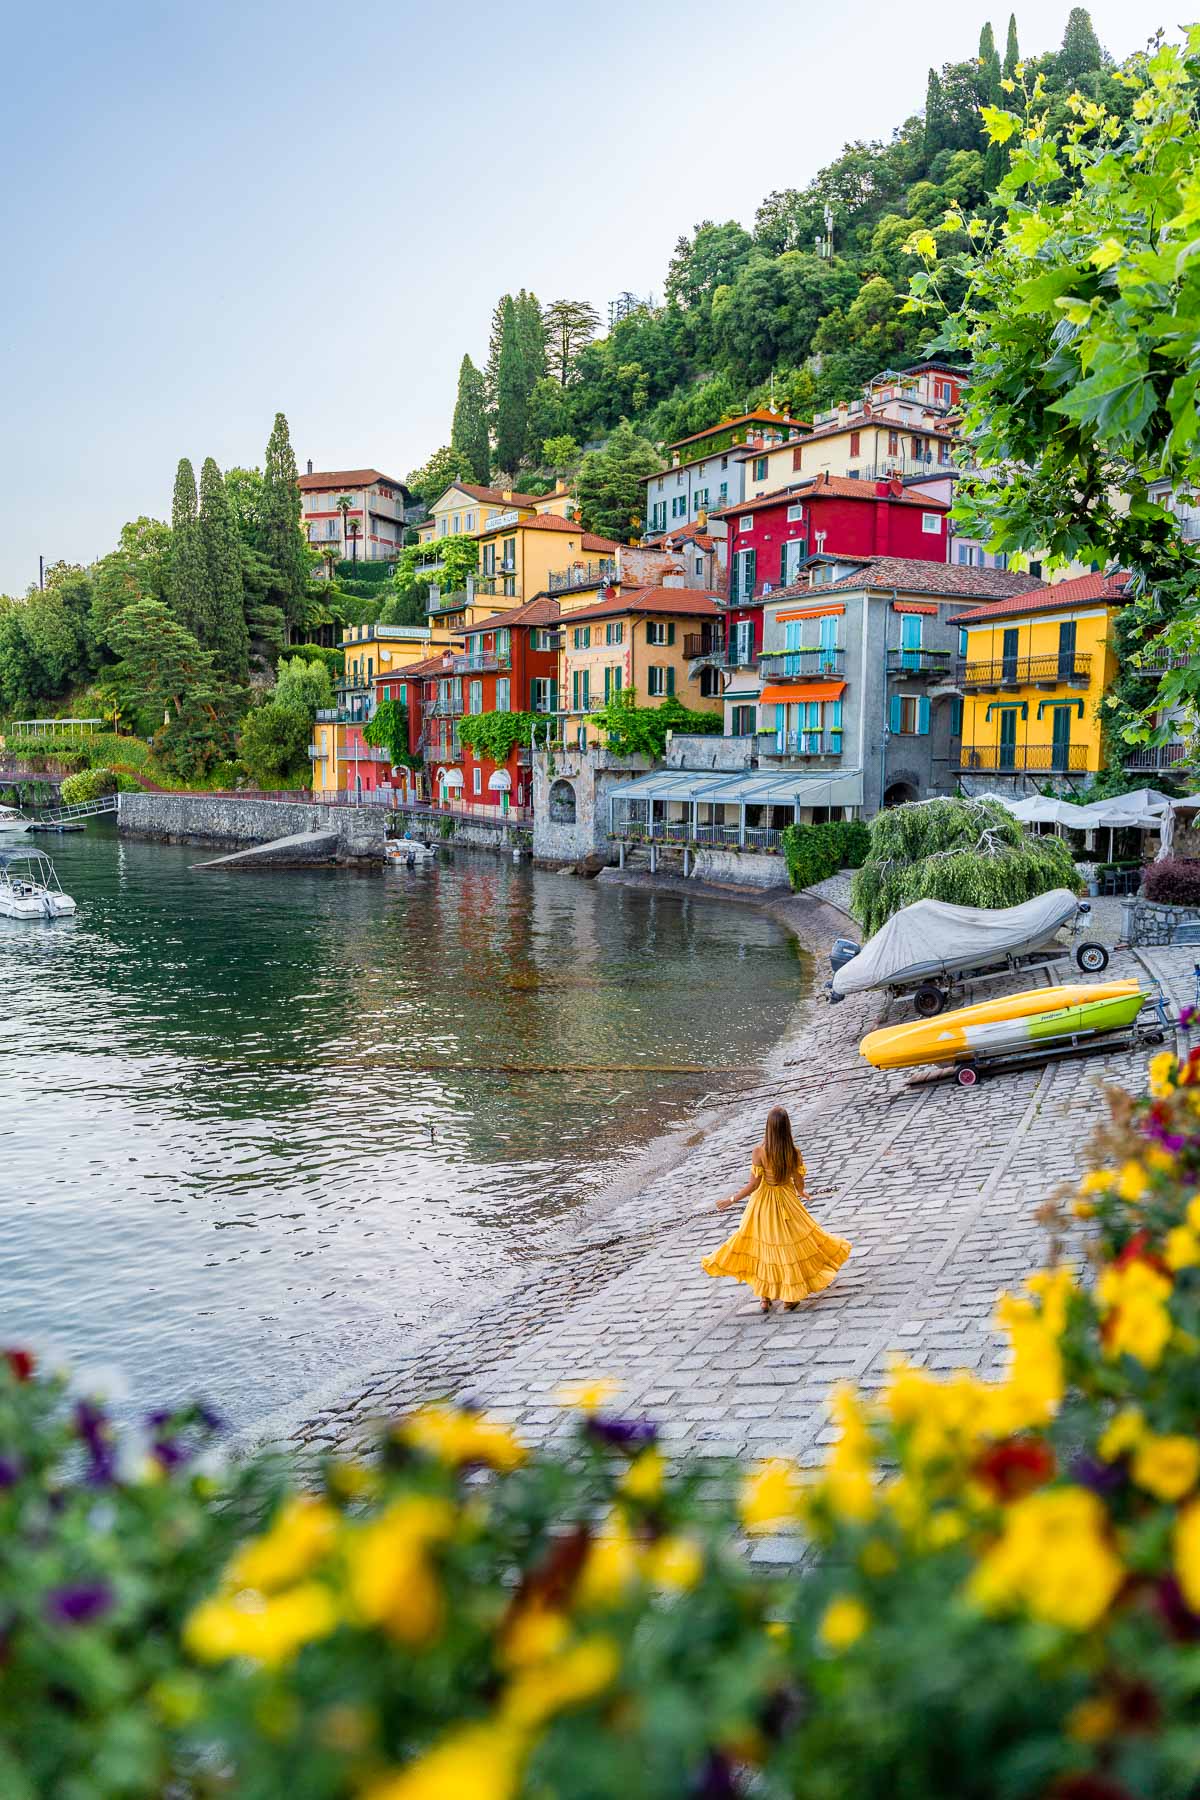 Girl in yellow dress in front of the colorful houses in Varenna, Lake Como